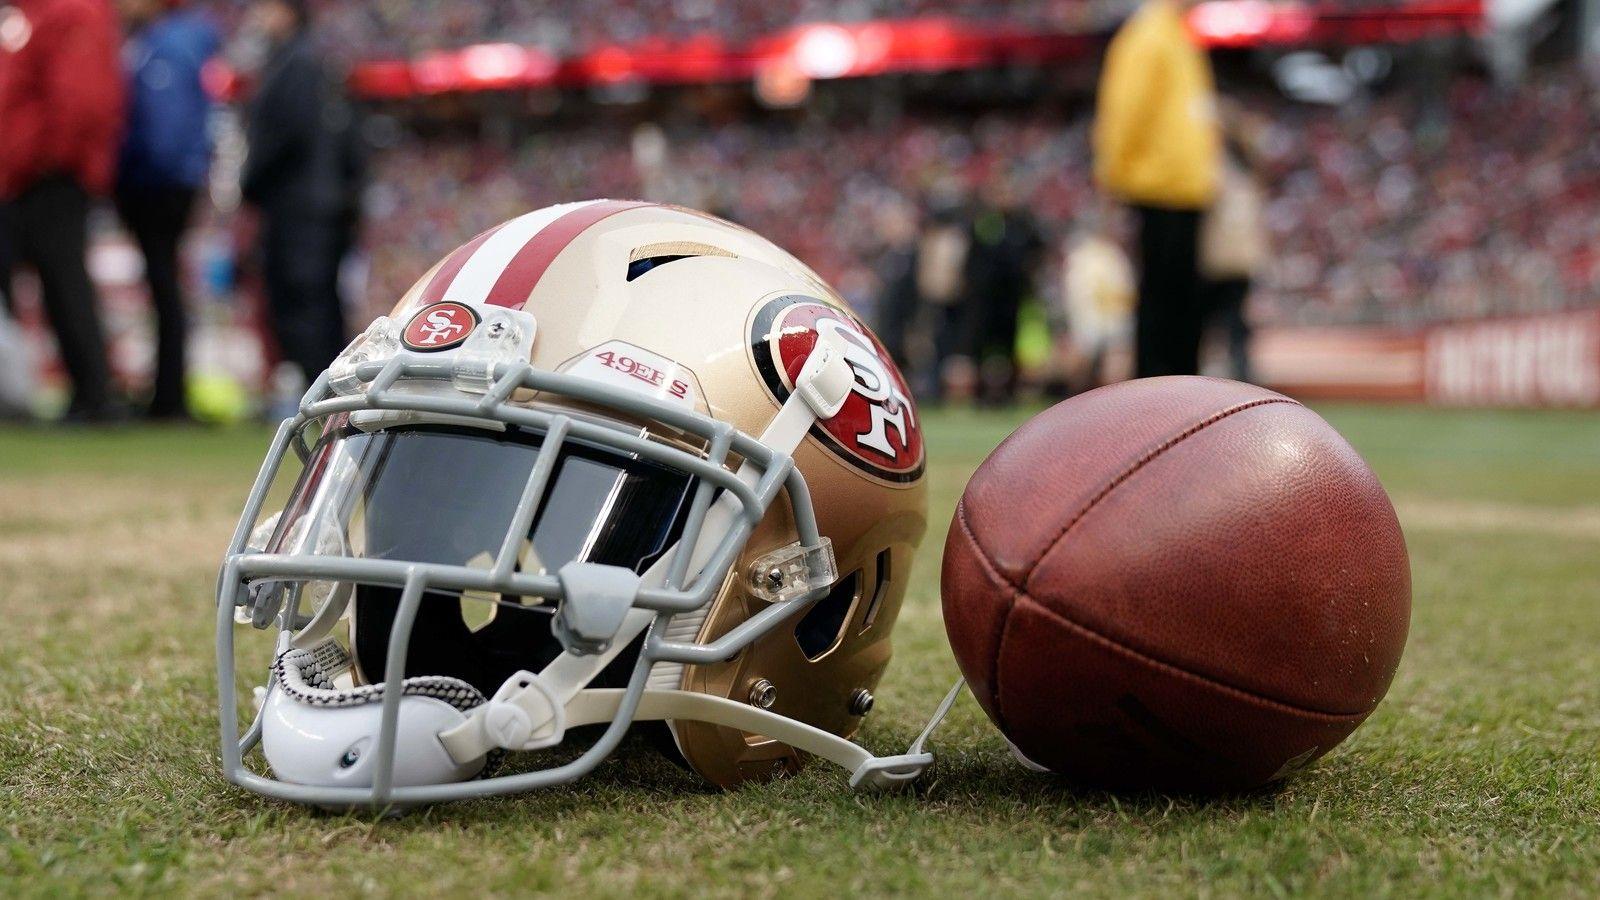 49ers reportedly will have new alternate uniform in 2018